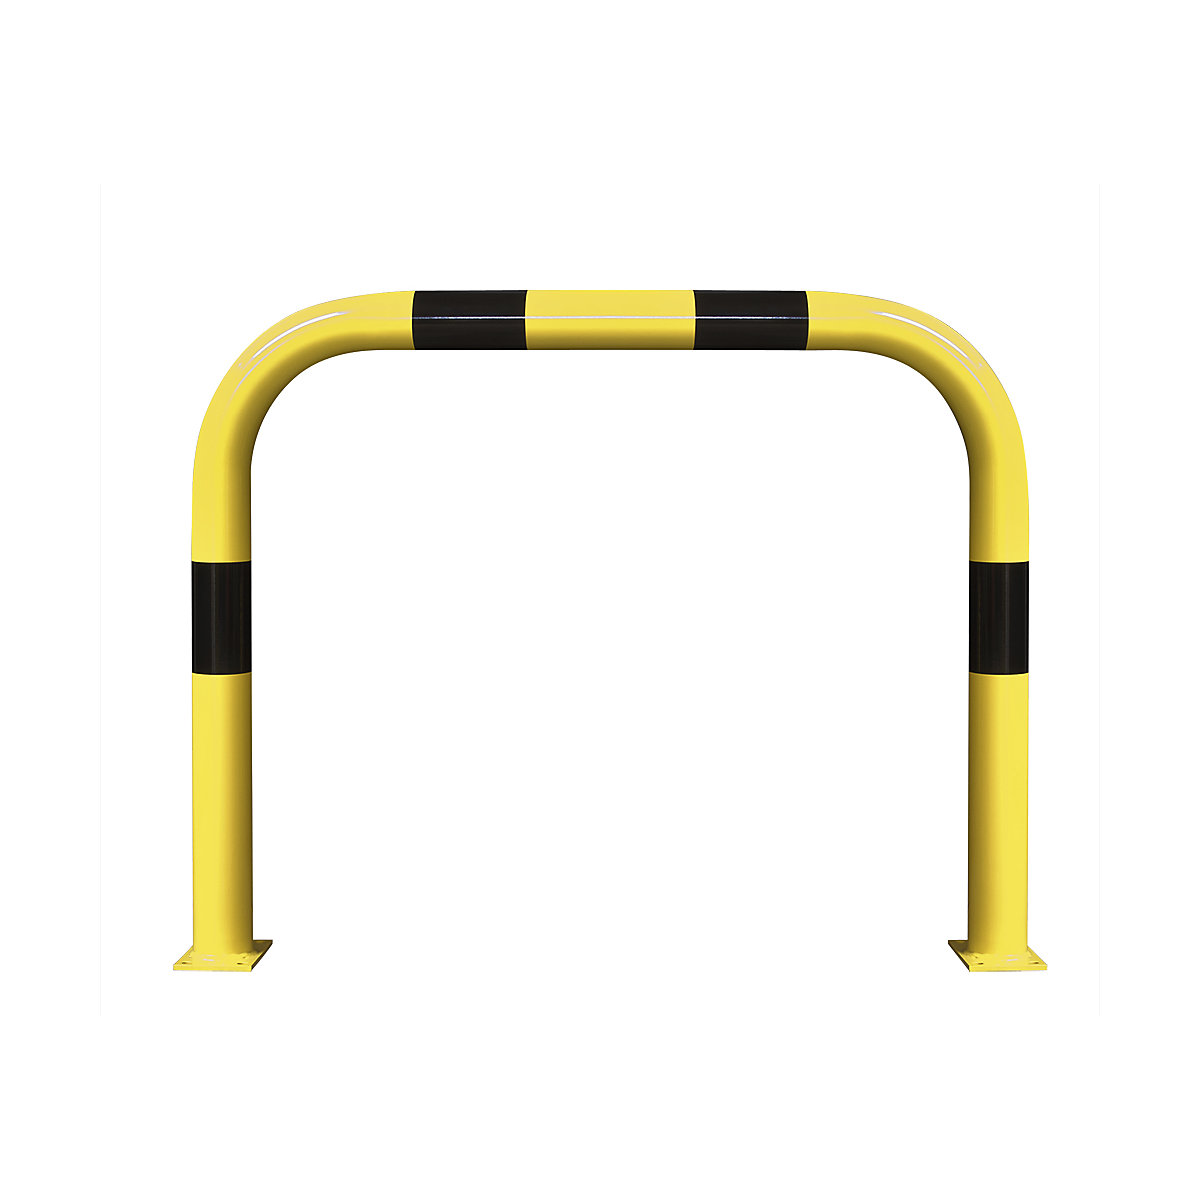 XXL crash protection bar Ø 108 mm, for outdoor use, H x W 1200 x 1500 mm